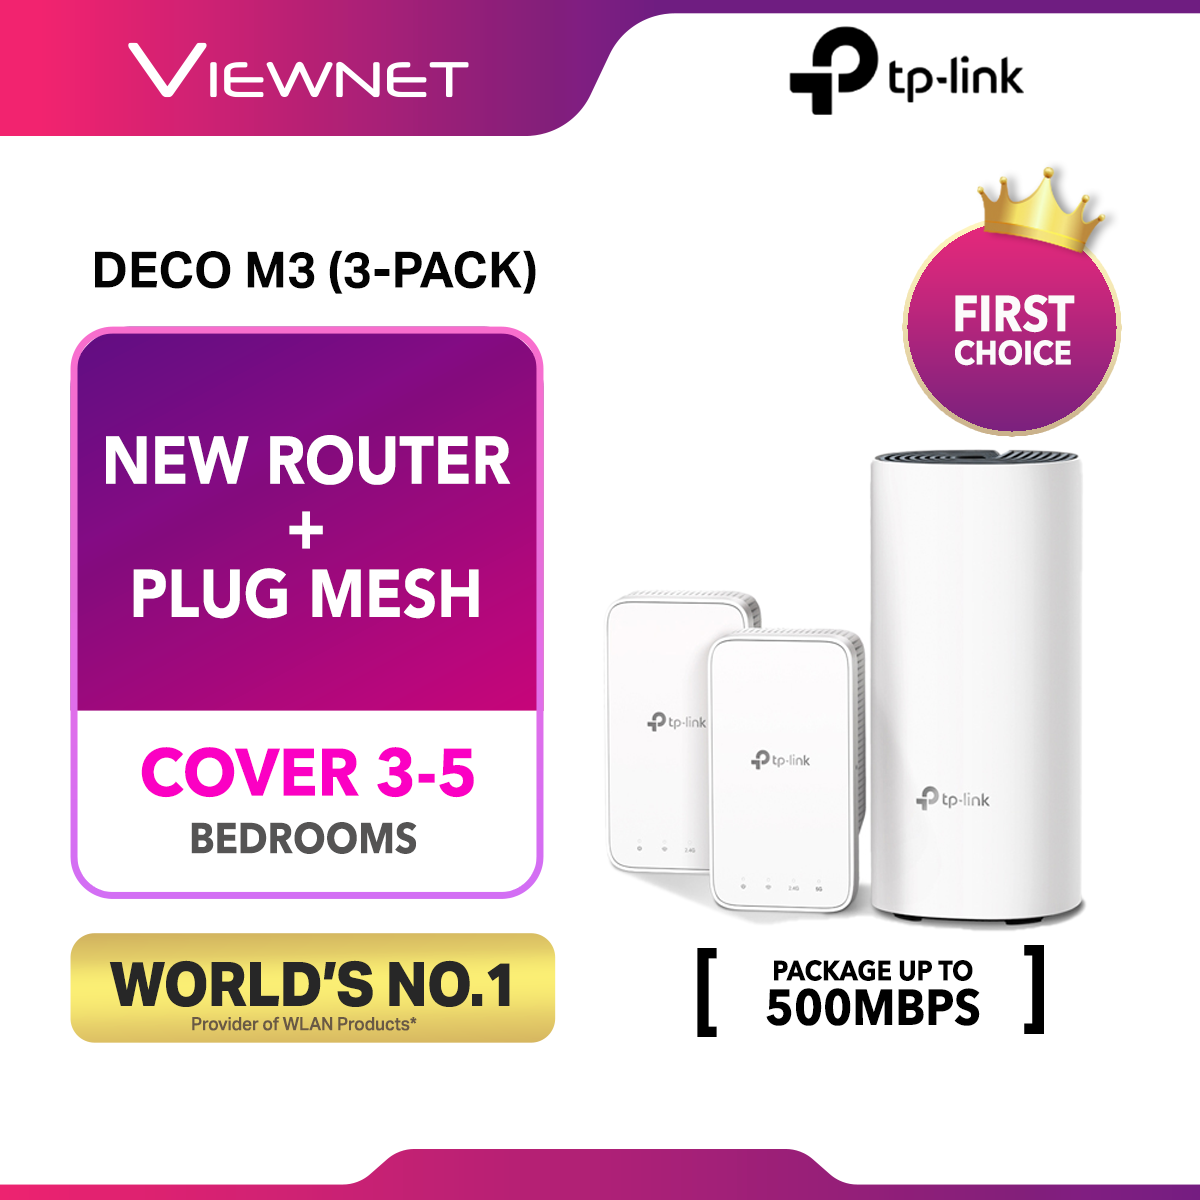 TP-LINK Deco M3 Mesh Router Deco M3 Whole Home Wi-Fi System DECO M3 2 PACK / DECO M3 3 PACK / Support Unifi , HyppTV, Nearly as Deco M4